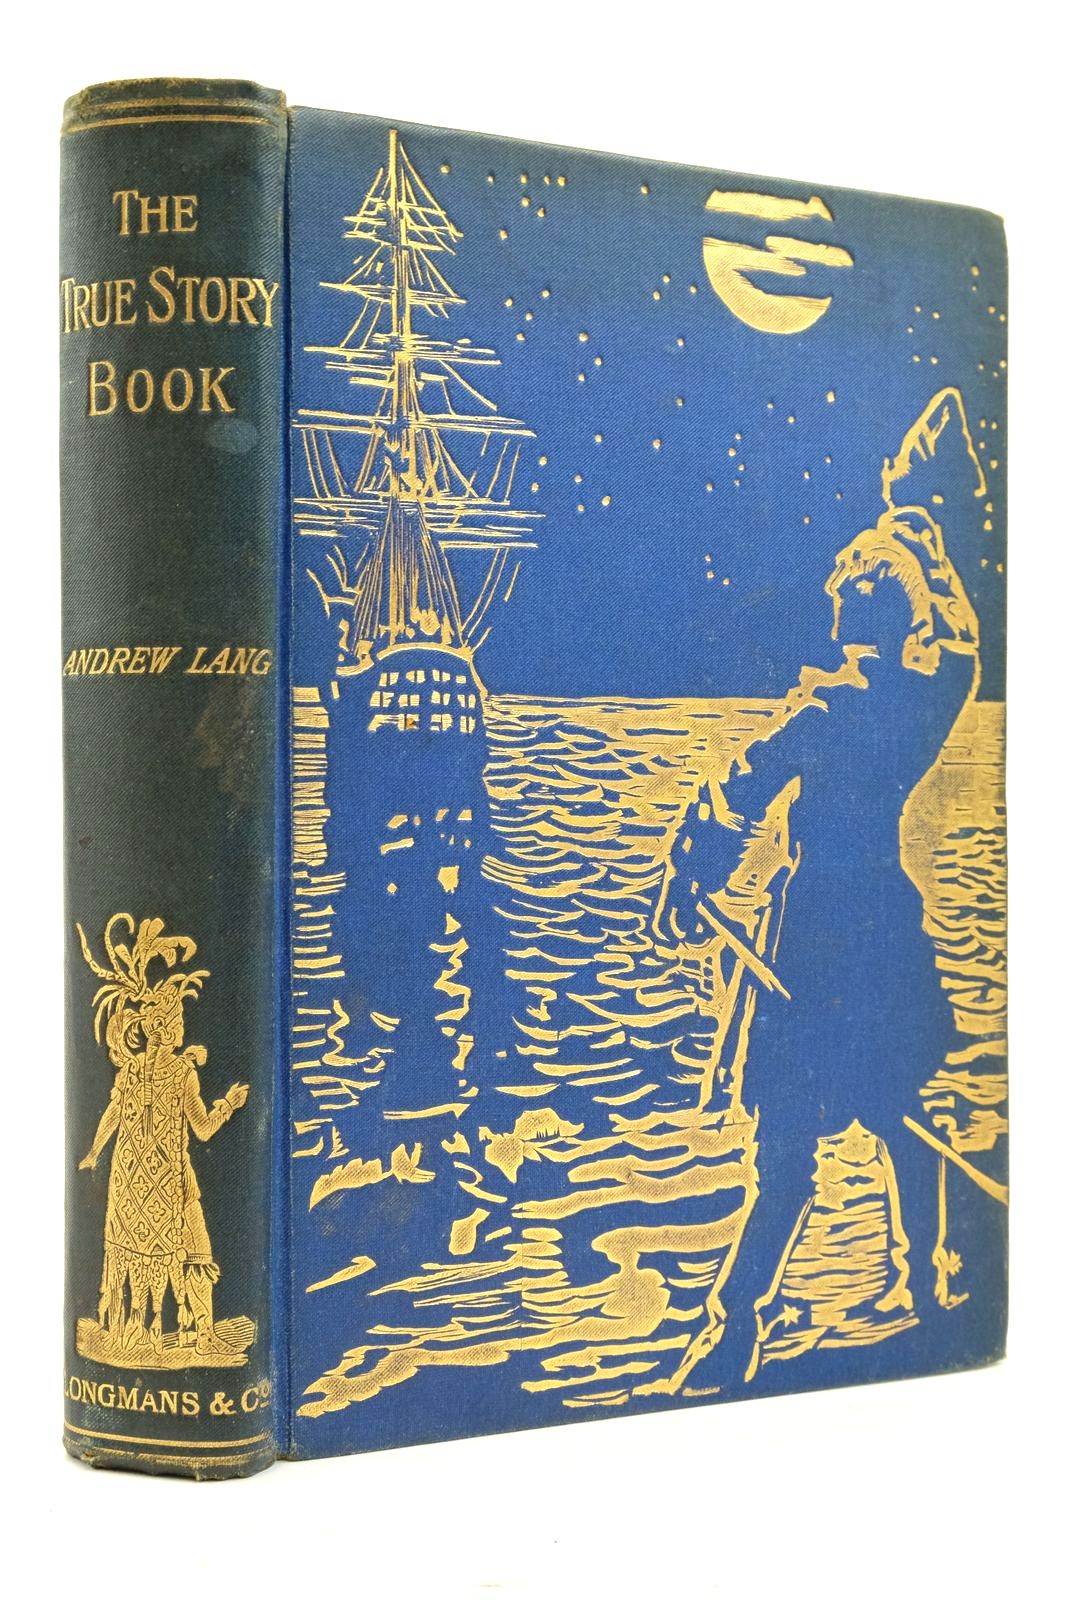 Photo of THE TRUE STORY BOOK written by Lang, Andrew illustrated by Bogle, Lockhart Davis, Lucien Ford, H.J. Kerr, C. H. M. Speed, Lancelot published by Longmans, Green &amp; Co. (STOCK CODE: 2138069)  for sale by Stella & Rose's Books